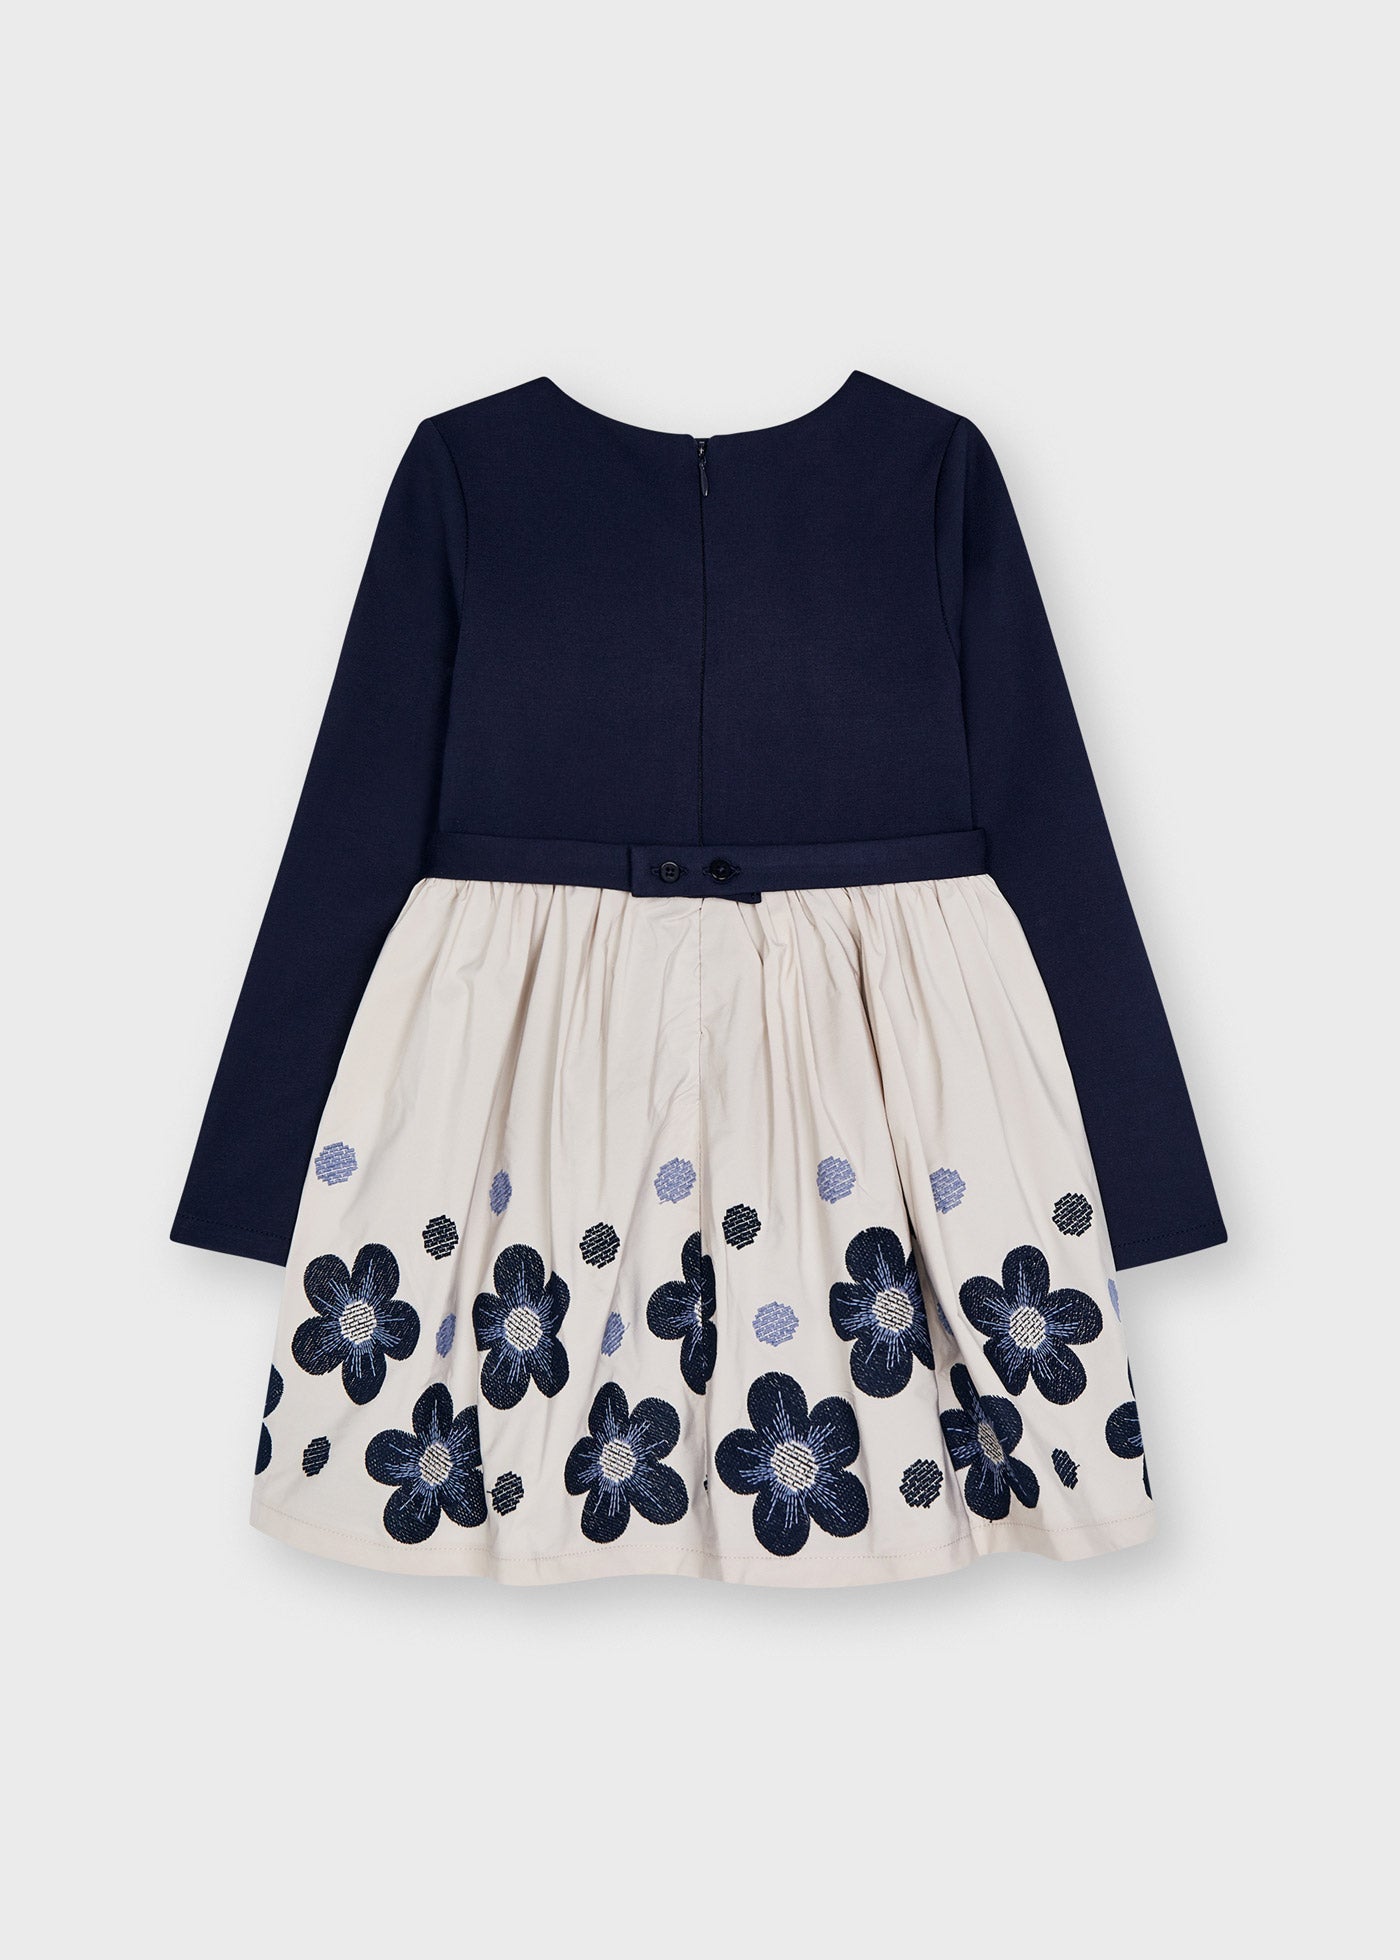 AW21 MAYORAL Girls Navy Embroidered Flower Dress - 4916